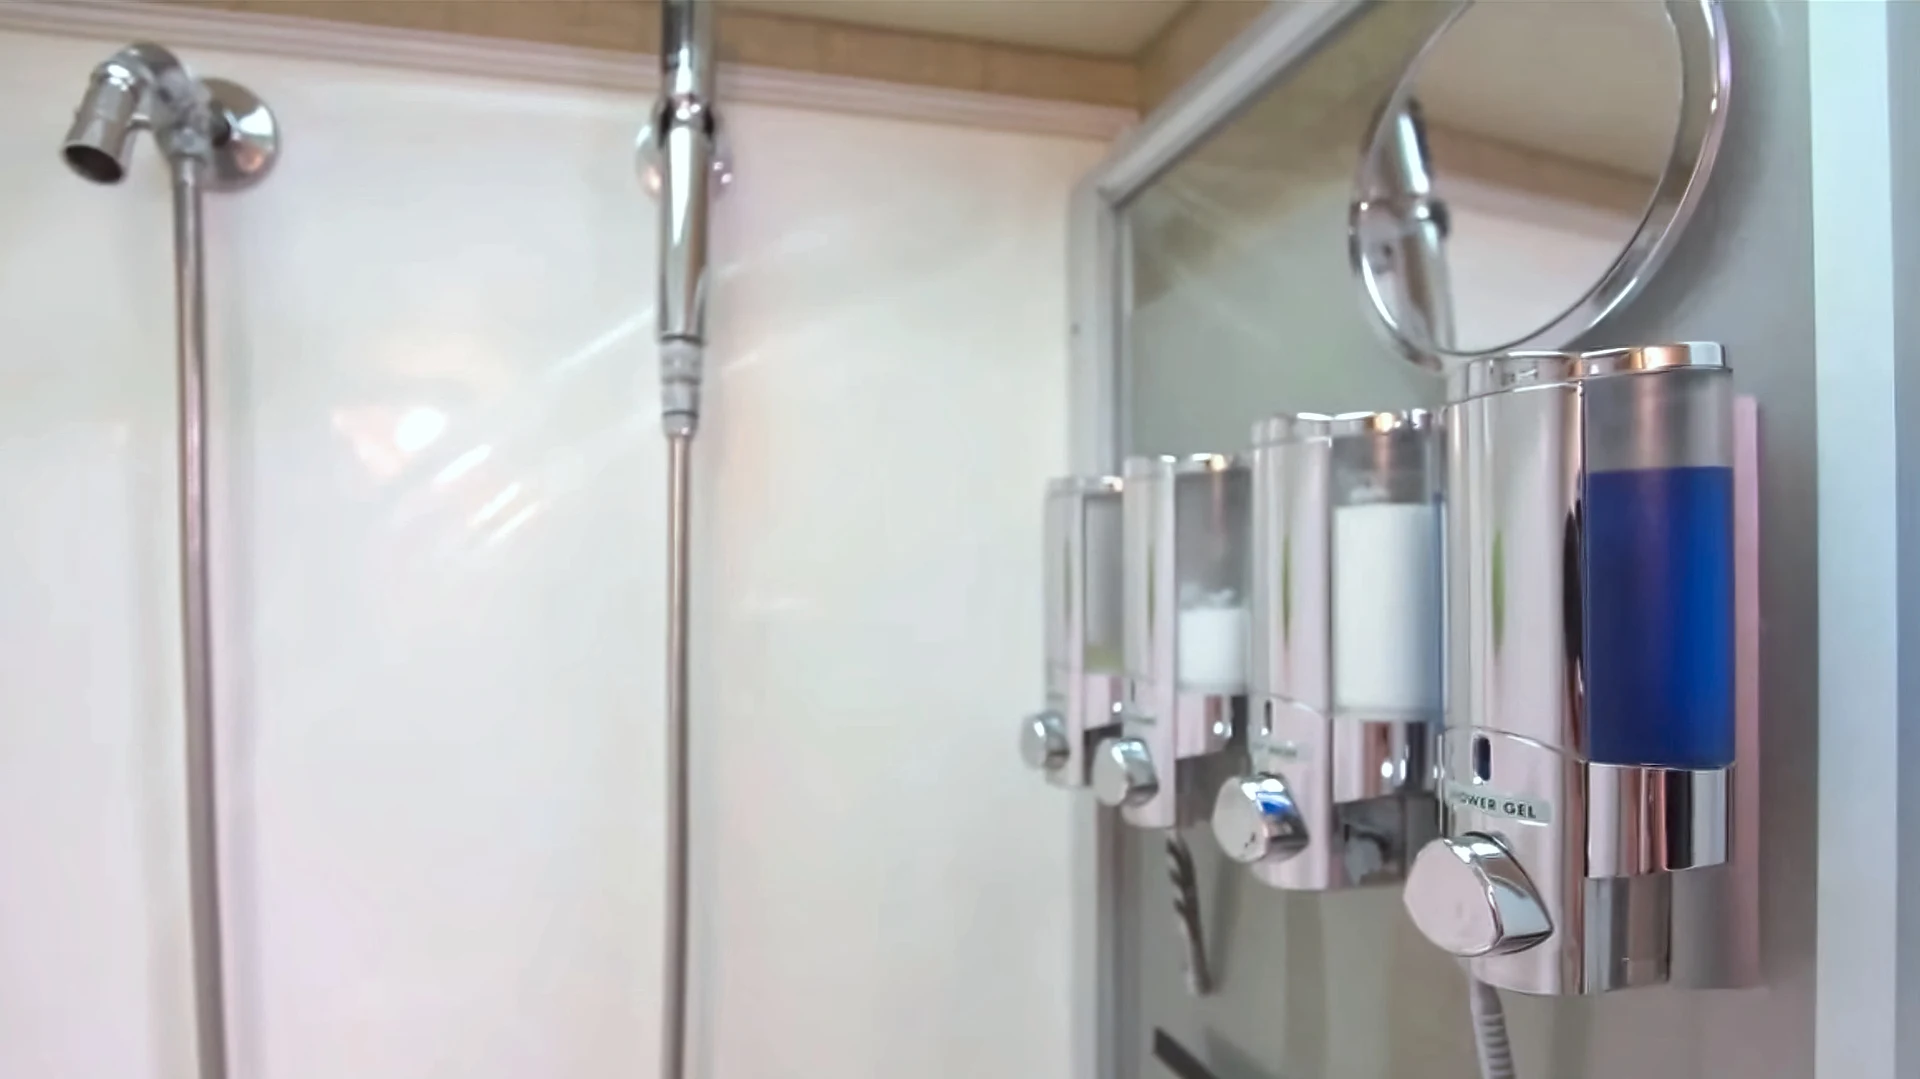 Our RV shower setup with wall-mounted dispensers